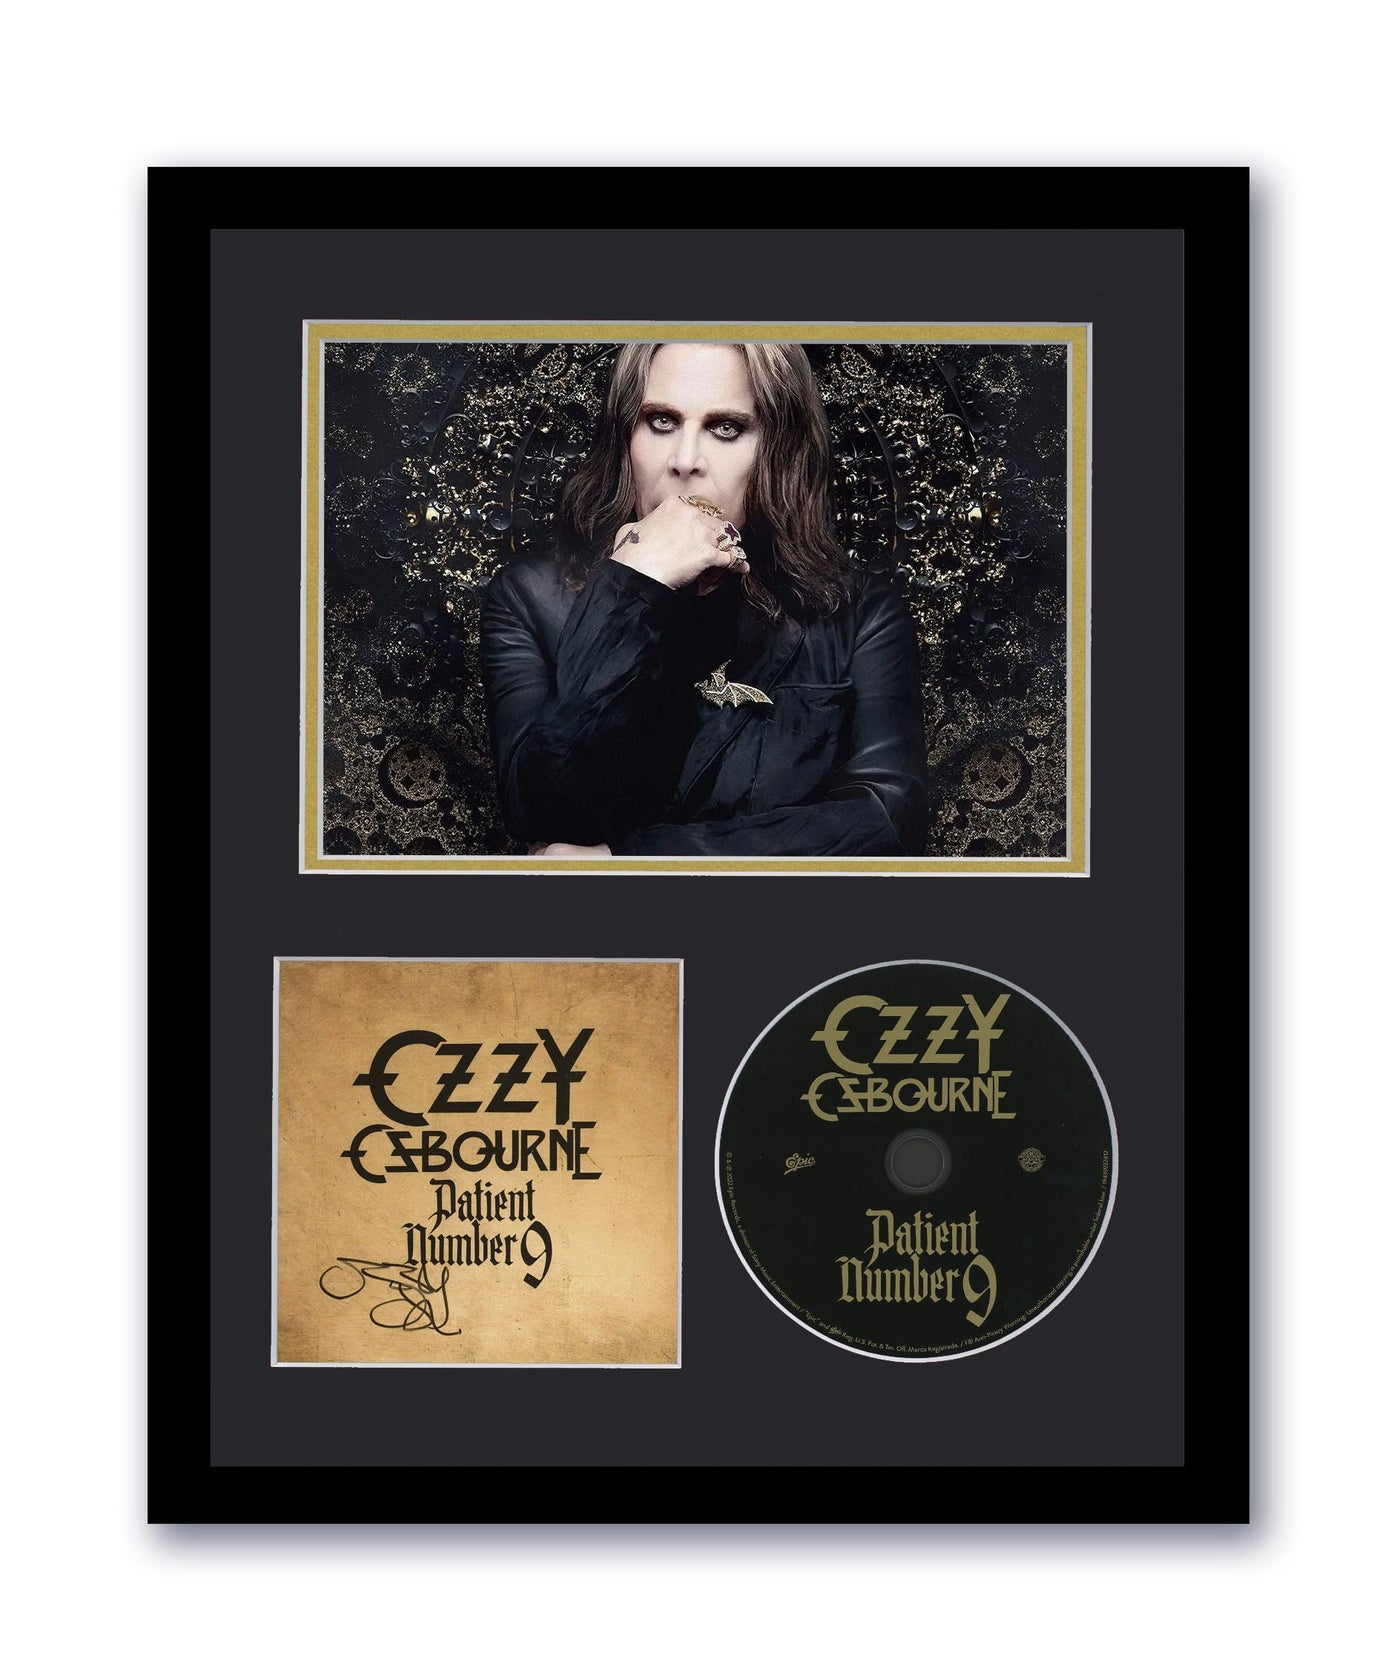 Ozzy Osbourne Autographed 11x14 Framed CD Photo Patient Number 9 ACOA 7